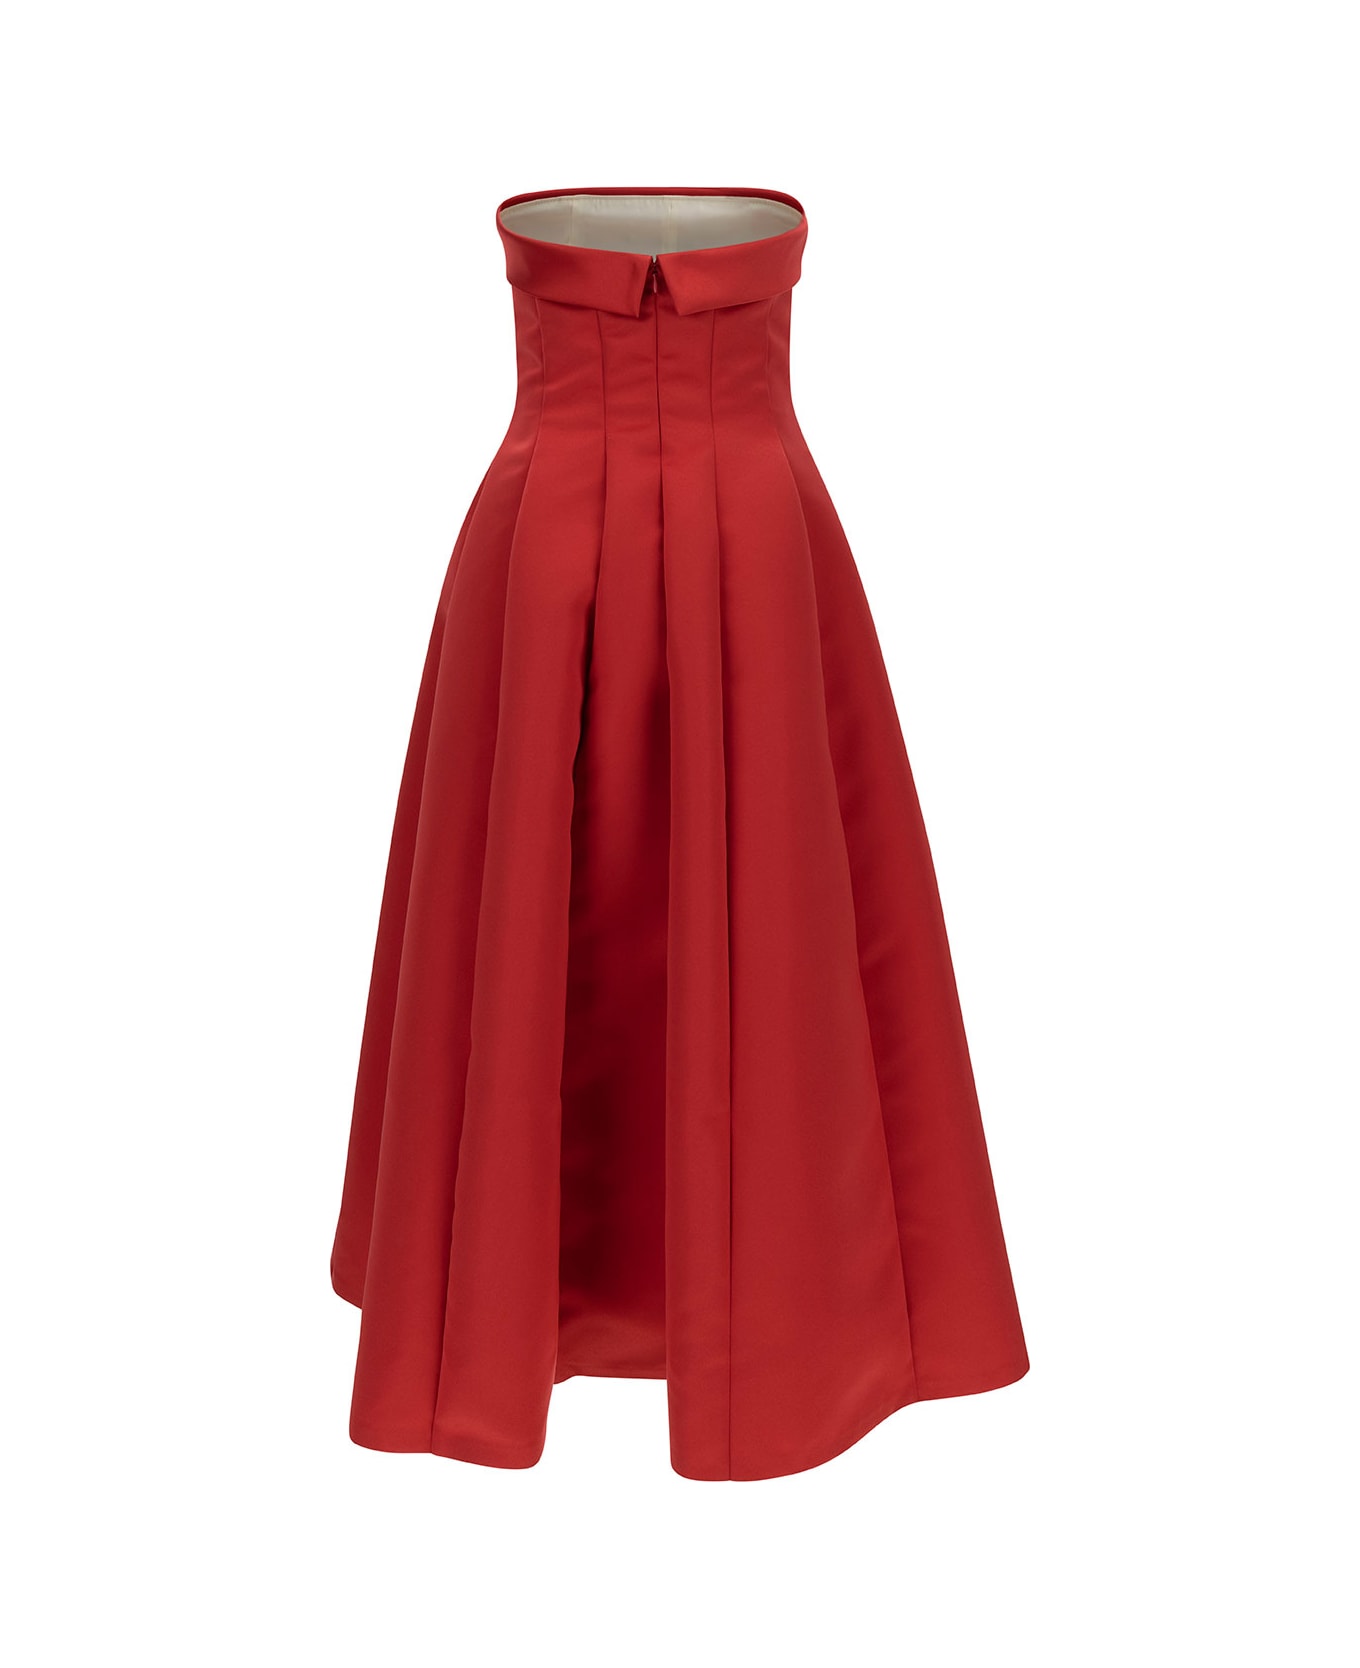 Philosophy di Lorenzo Serafini Longuette Red Dress With Flared Skirt In Duchesse Woman - Red ワンピース＆ドレス